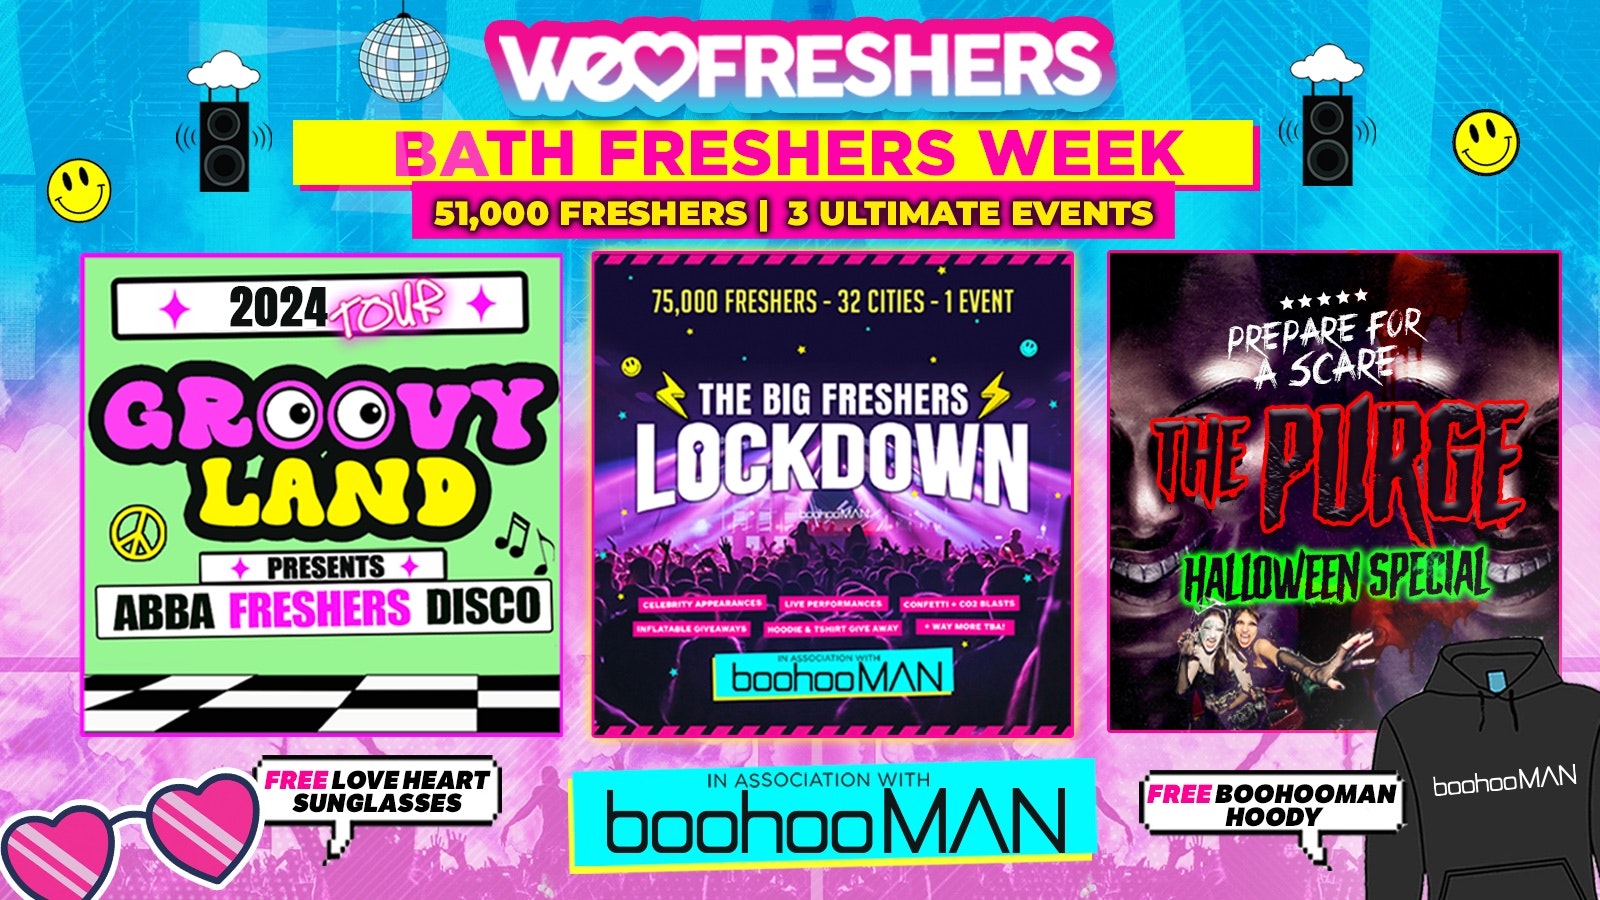 WE LOVE BATH FRESHERS 2024 in association with boohooMAN – ❗FREE BOOHOOMAN HOODY TODAY ONLY ❗